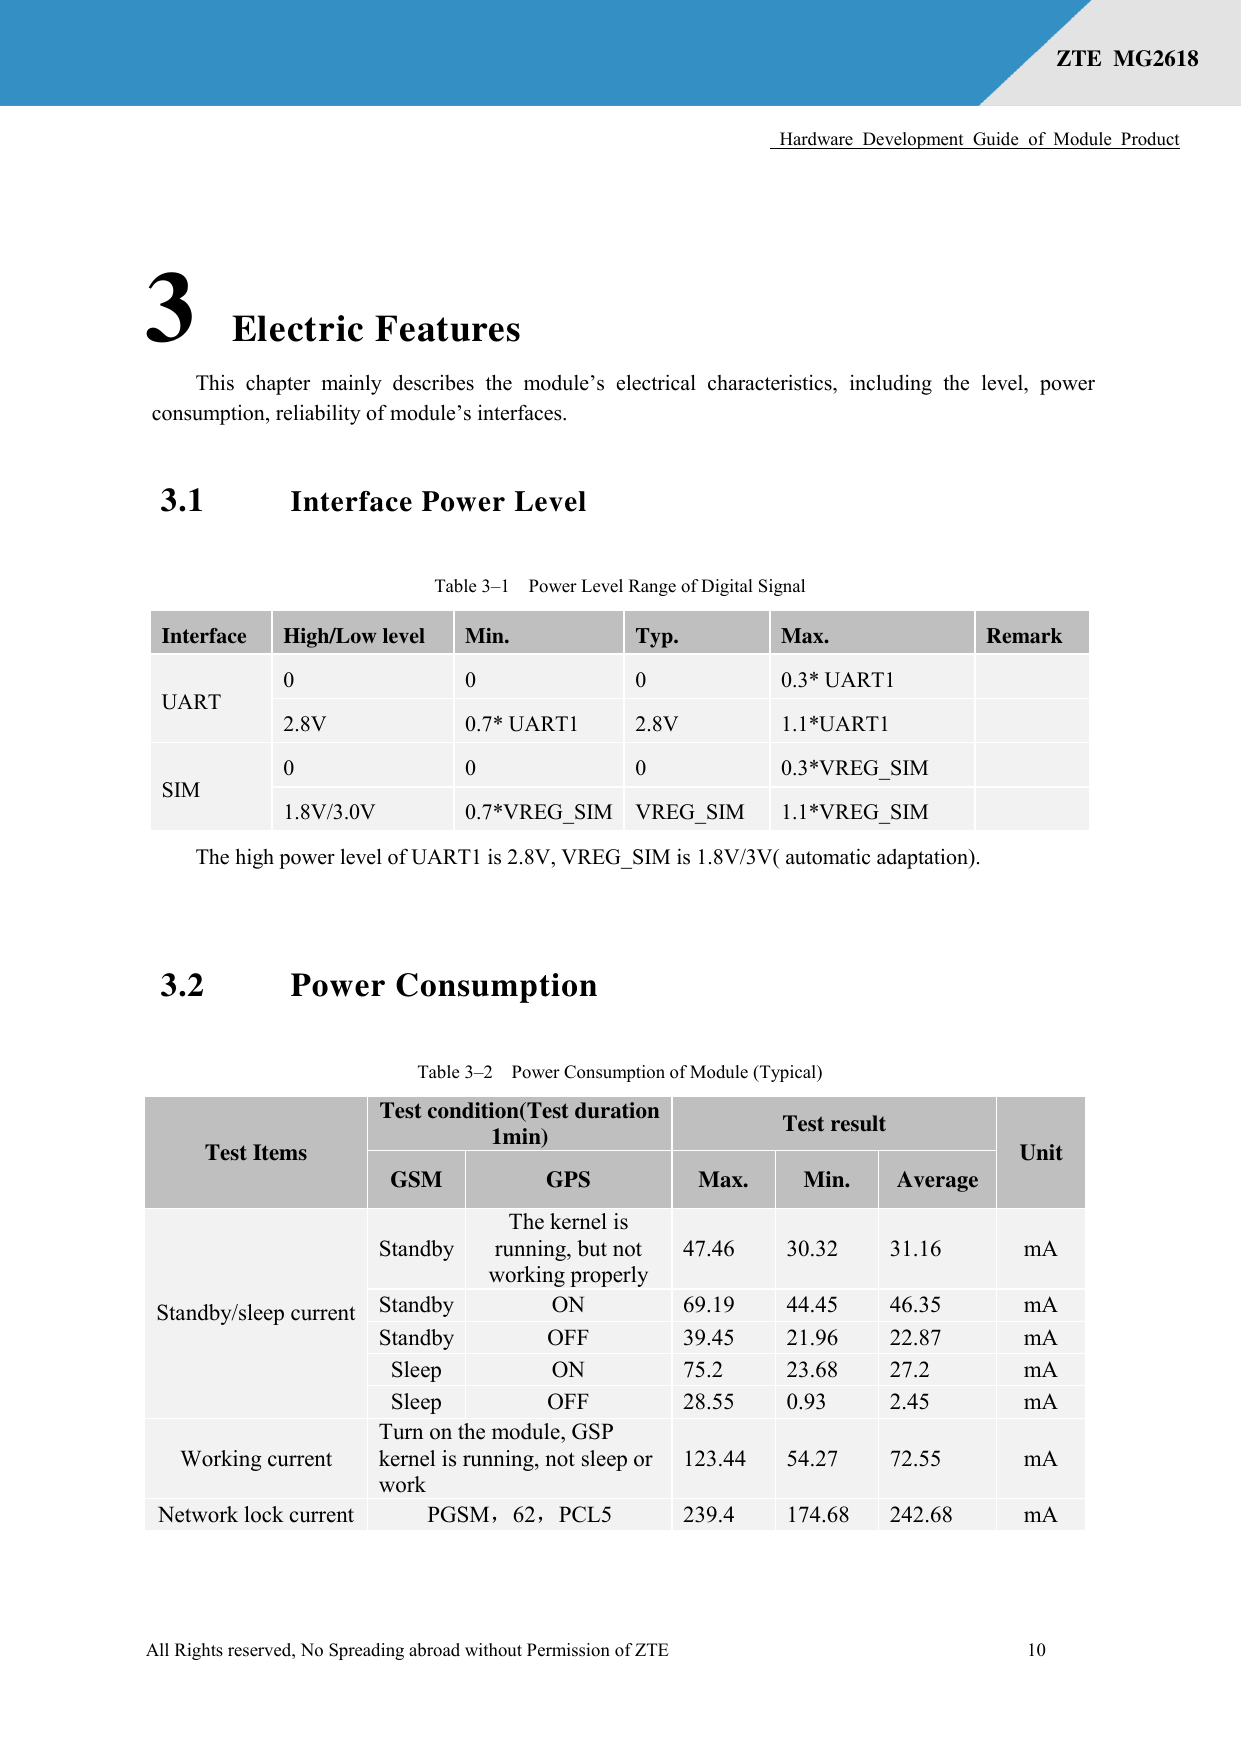      Hardware  Development  Guide  of  Module  Product  All Rights reserved, No Spreading abroad without Permission of ZTE              10 ZTE  MG2618   3 Electric Features This  chapter  mainly  describes  the  module’s  electrical  characteristics,  including  the  level,  power consumption, reliability of module’s interfaces. 3.1 Interface Power Level Table 3–1  Power Level Range of Digital Signal Interface High/Low level Min. Typ. Max. Remark UART 0 0 0 0.3* UART1  2.8V 0.7* UART1 2.8V 1.1*UART1  SIM 0 0 0 0.3*VREG_SIM  1.8V/3.0V 0.7*VREG_SIM VREG_SIM 1.1*VREG_SIM  The high power level of UART1 is 2.8V, VREG_SIM is 1.8V/3V( automatic adaptation).  3.2 Power Consumption Table 3–2  Power Consumption of Module (Typical) Test Items Test condition(Test duration 1min) Test result Unit GSM GPS Max. Min. Average Standby/sleep current Standby The kernel is running, but not working properly 47.46 30.32 31.16 mA Standby ON 69.19 44.45 46.35 mA Standby OFF 39.45 21.96 22.87 mA Sleep   ON 75.2 23.68 27.2 mA Sleep   OFF 28.55 0.93 2.45 mA Working current Turn on the module, GSP kernel is running, not sleep or work 123.44 54.27 72.55 mA Network lock current PGSM，62，PCL5 239.4 174.68 242.68 mA 